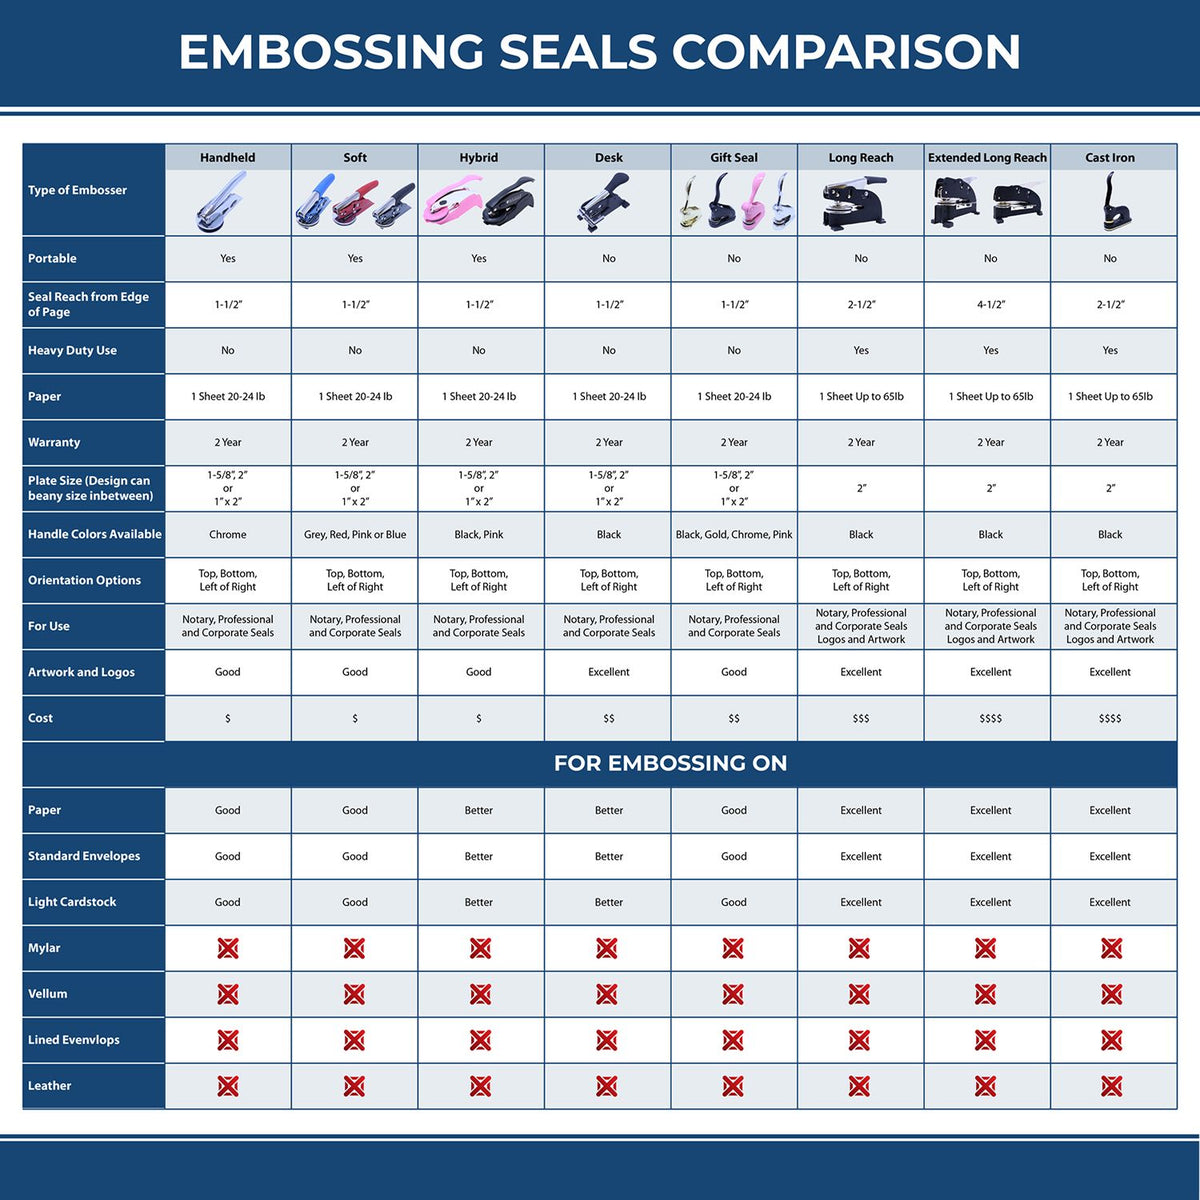 A comparison chart for the different types of mount models available for the State of Arkansas Extended Long Reach Geologist Seal